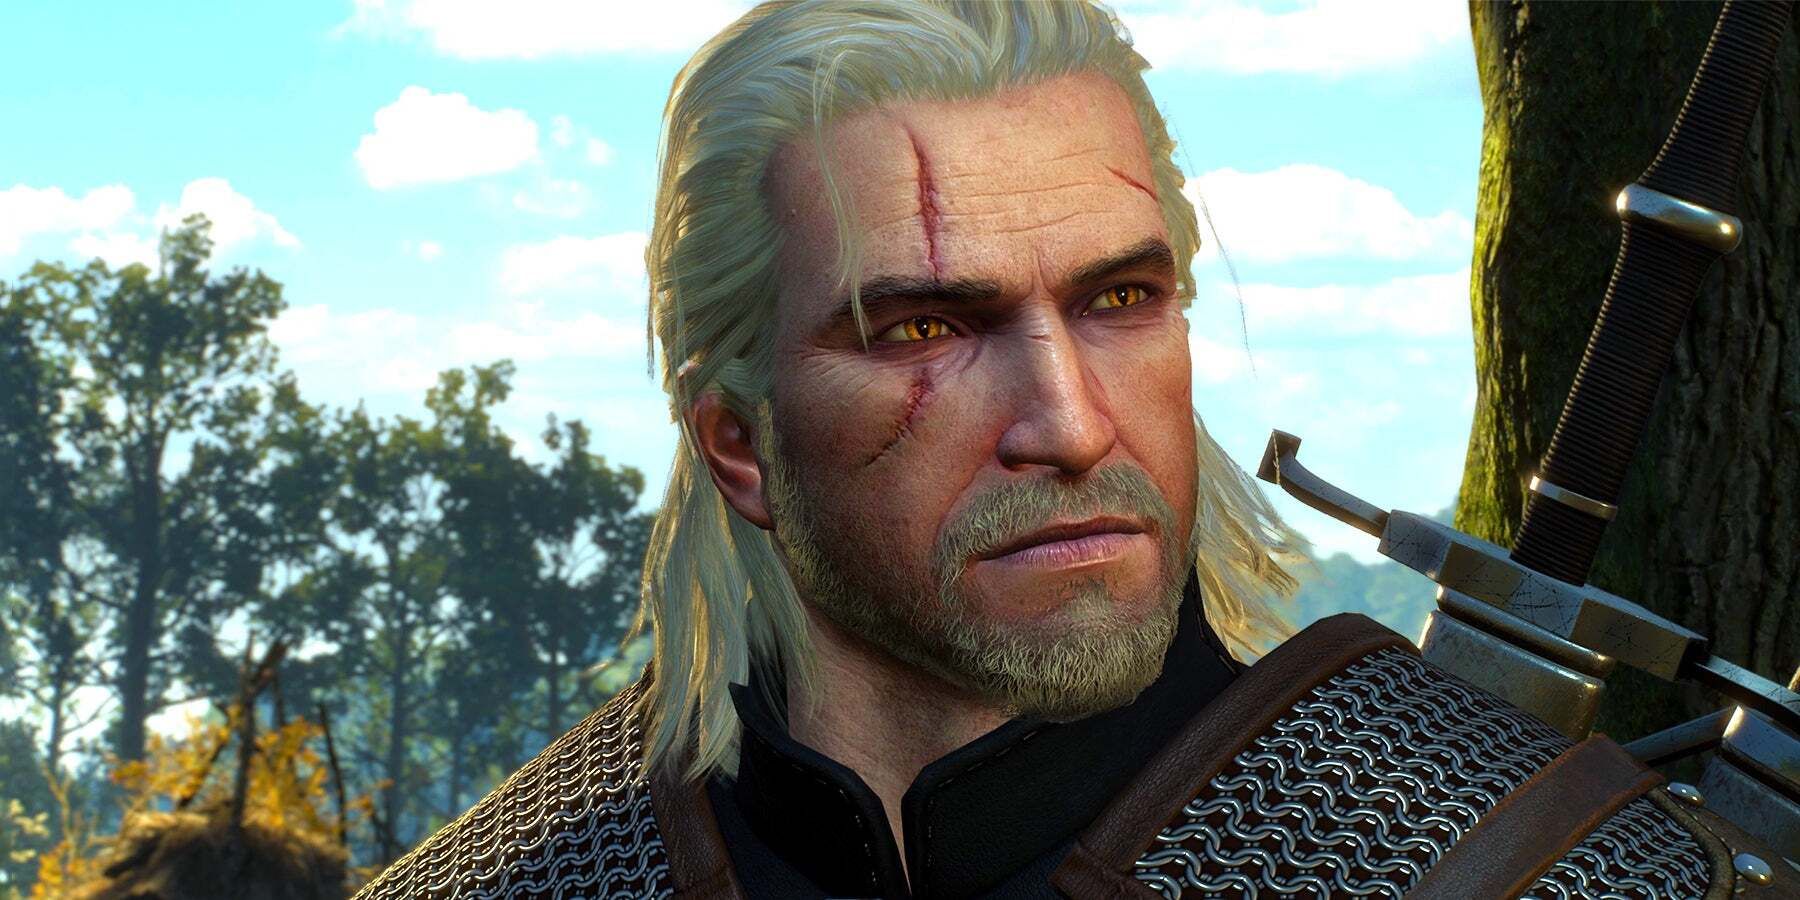 The Witcher 3 Update 4.01 List of Changes